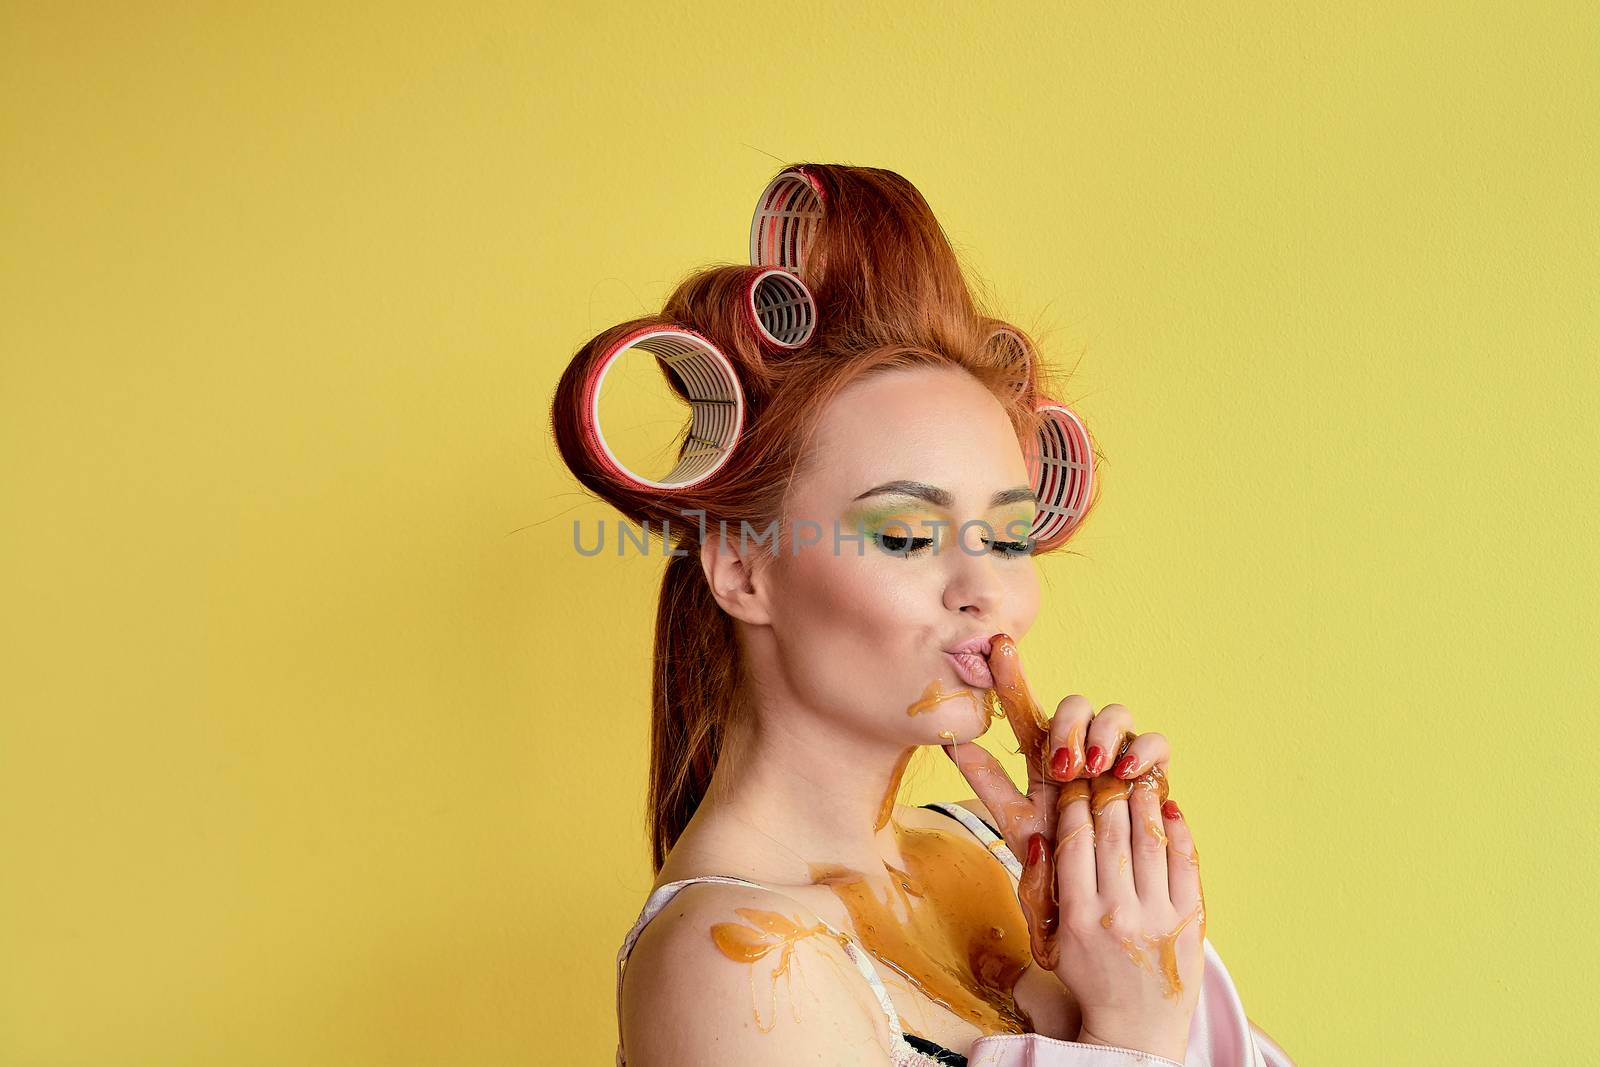 Young redhead woman with shugaring paste on her hands, face, body and chest. Young redhead woman with hair curlers. Advertising concept of shugaring paste. Skin care concept with copyspace.